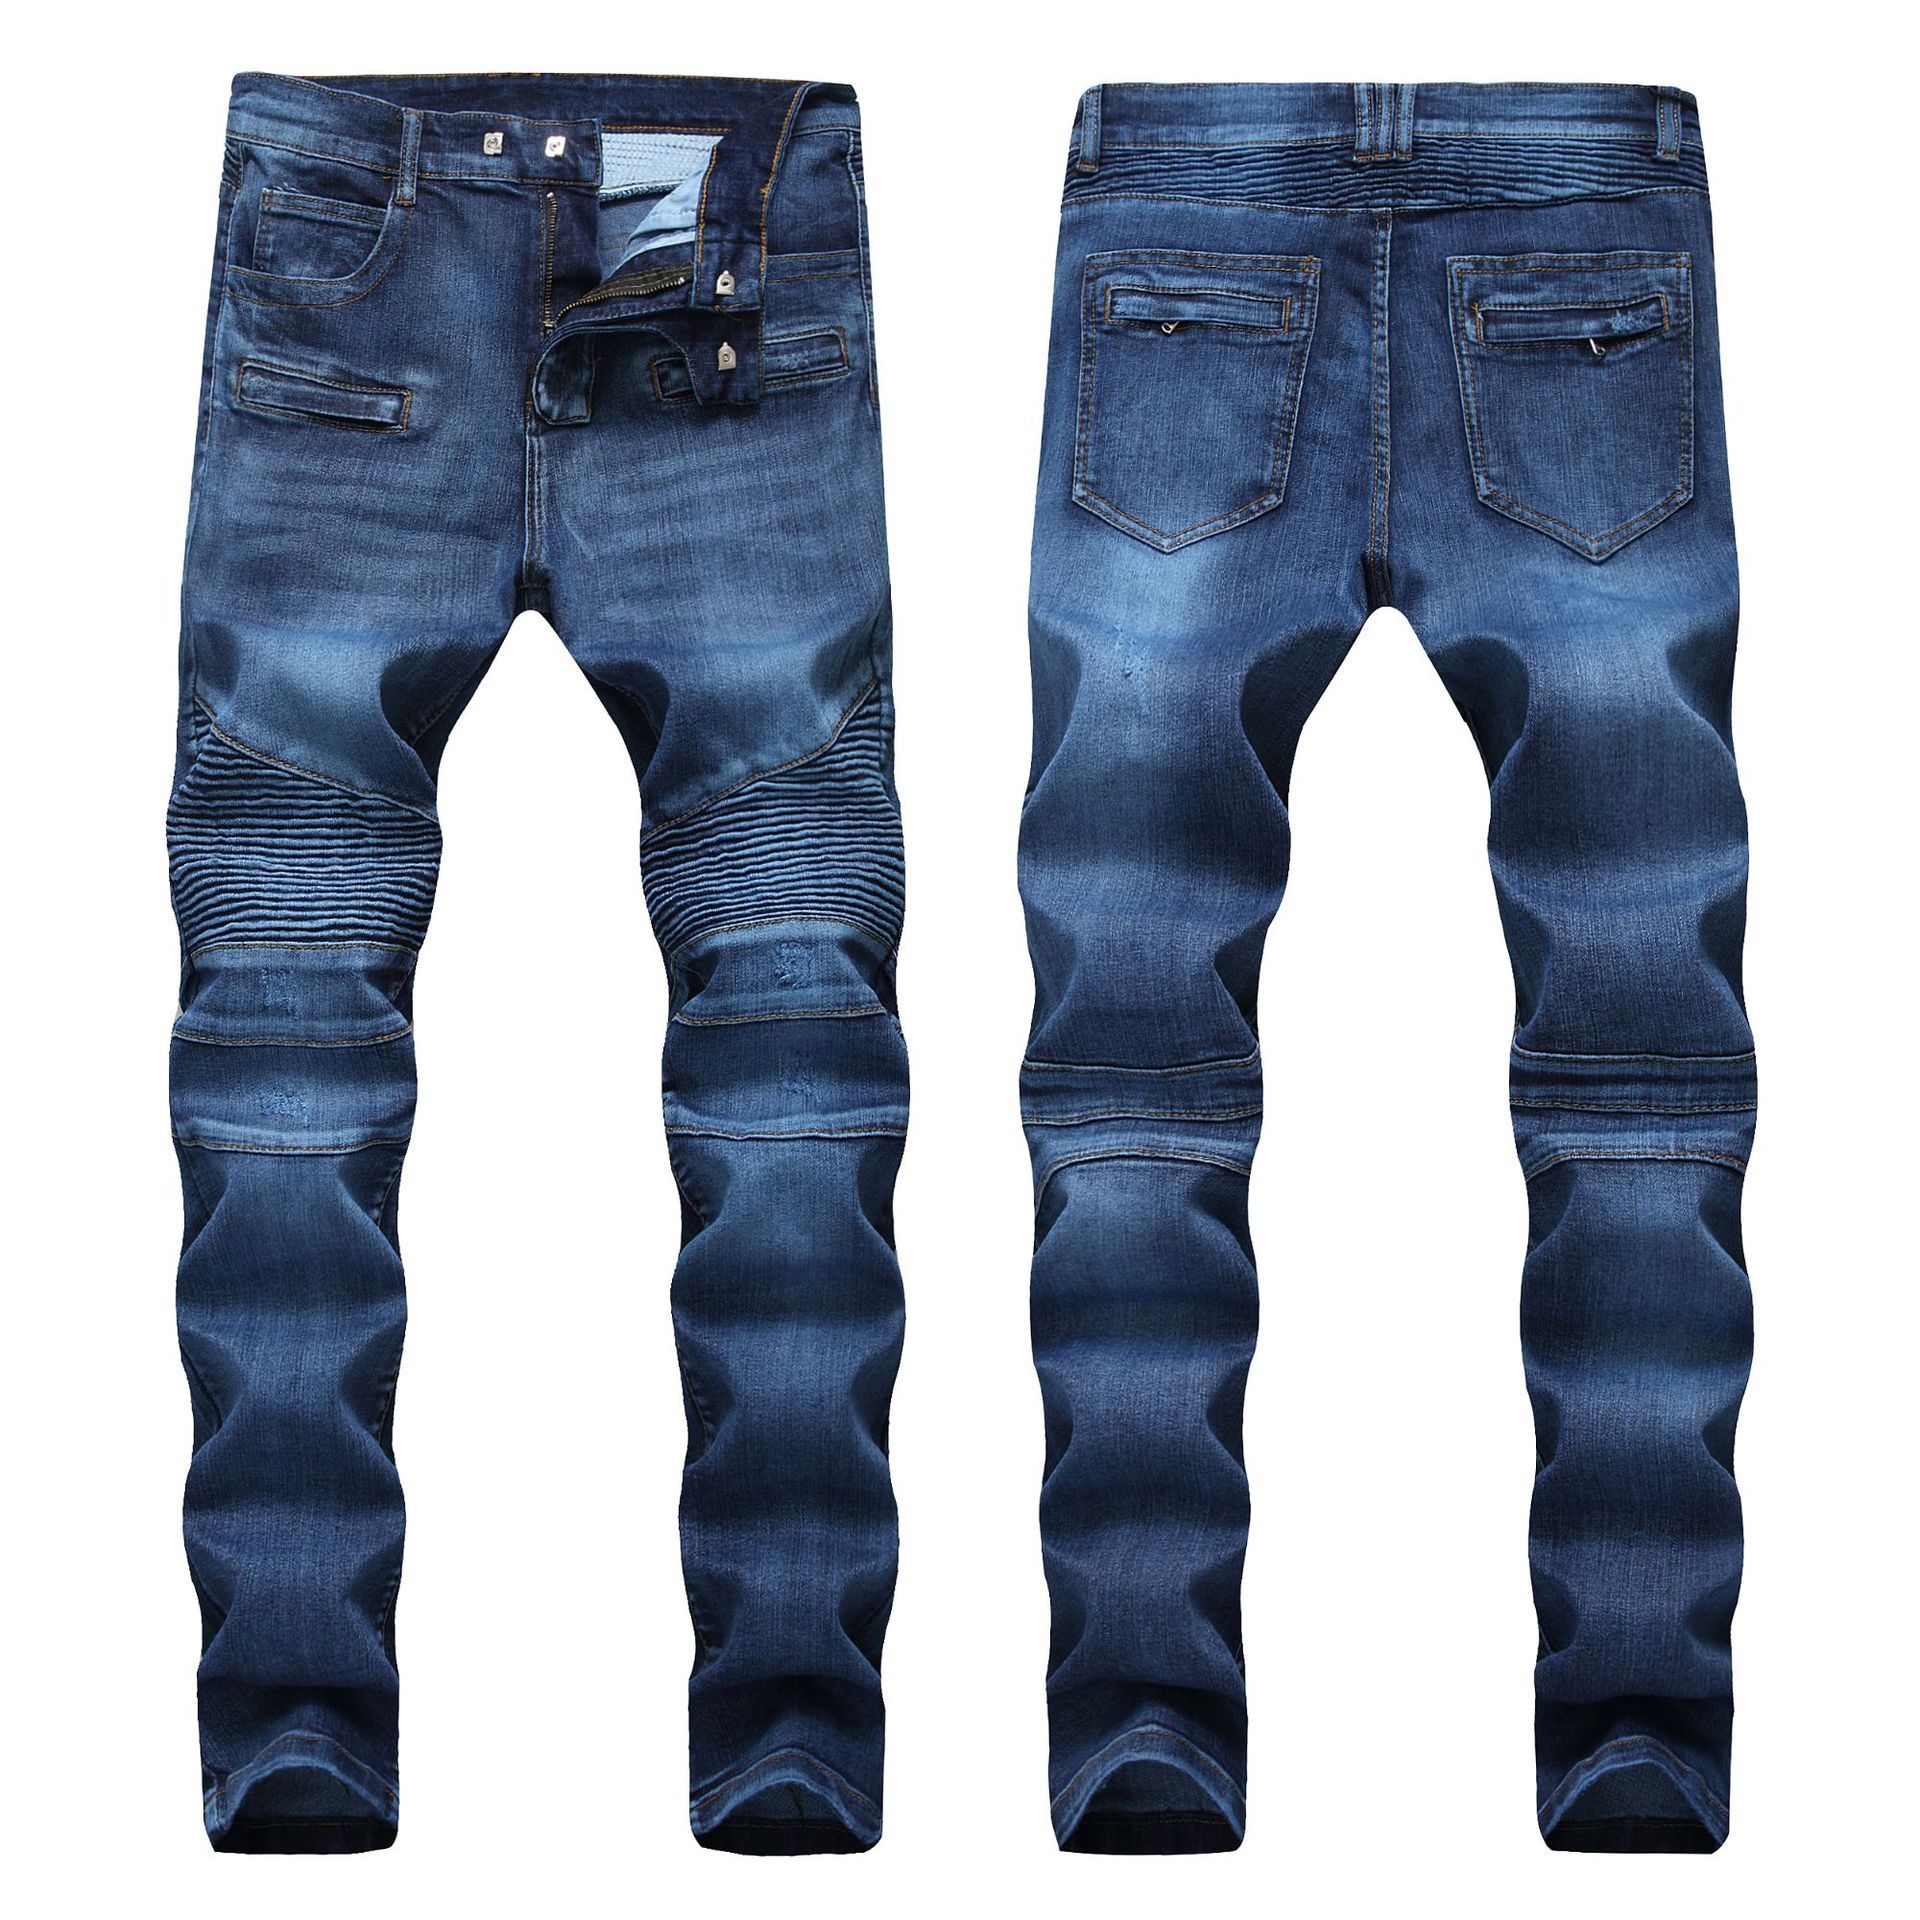 34 36 jeans